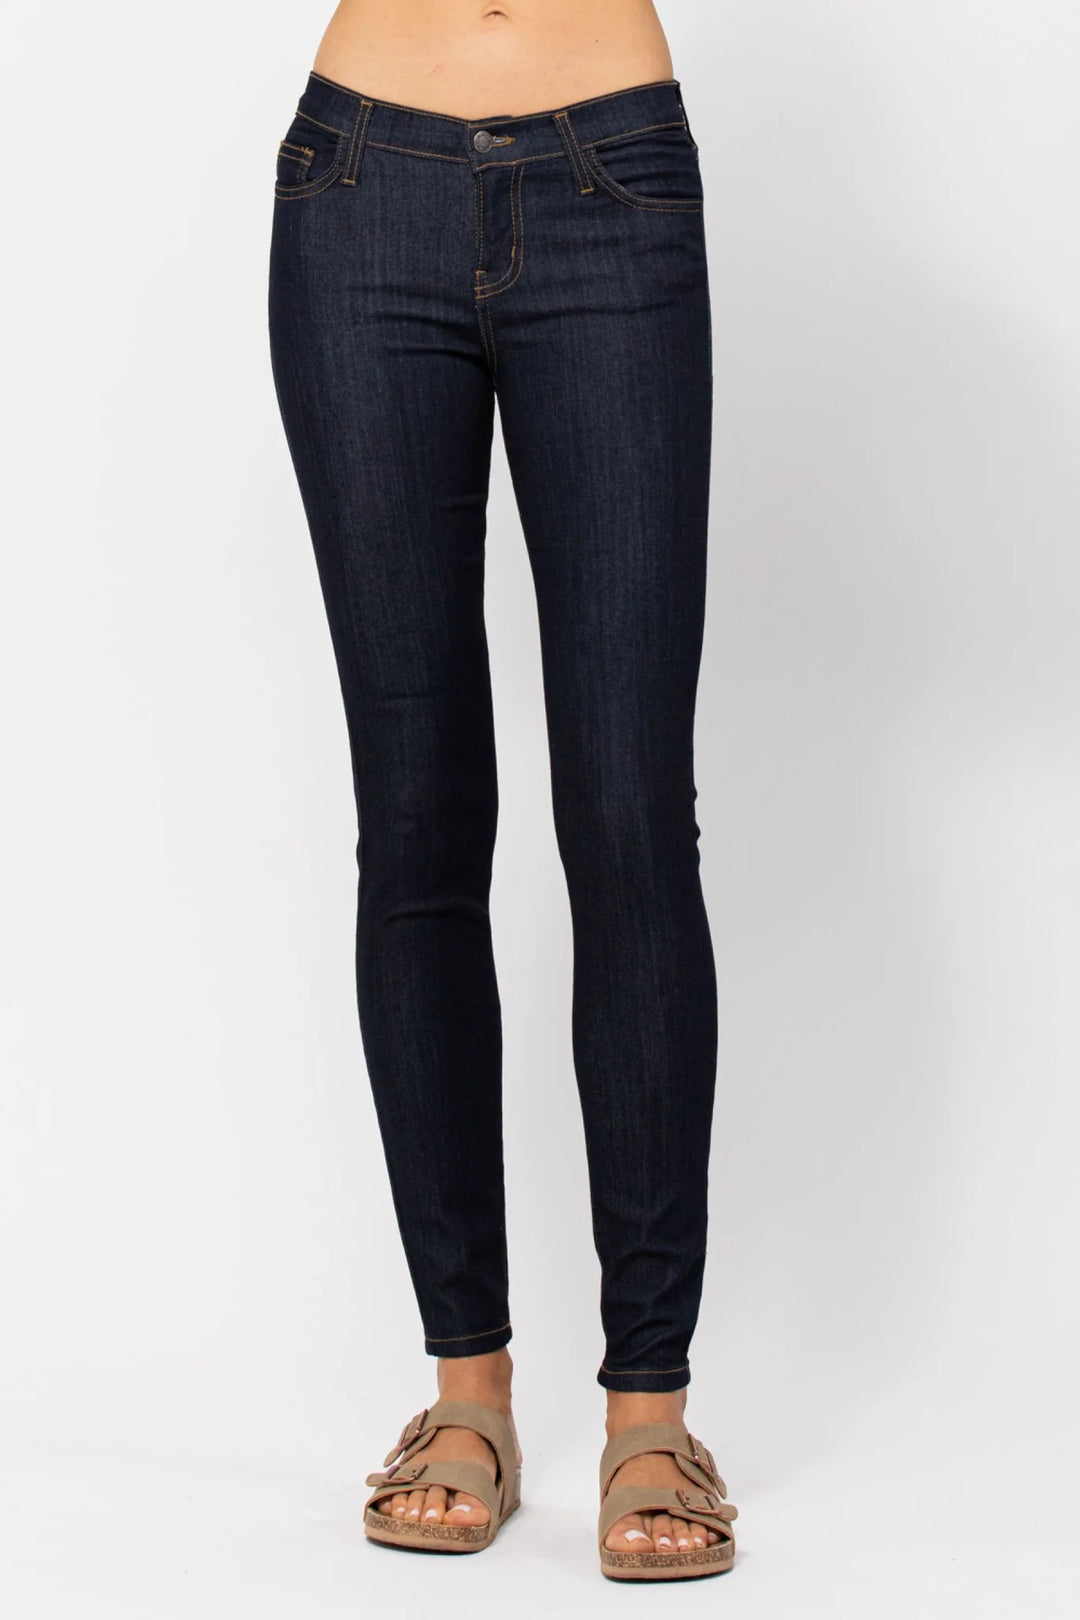 Judy Blue Stretchy & Comfortable Skinny